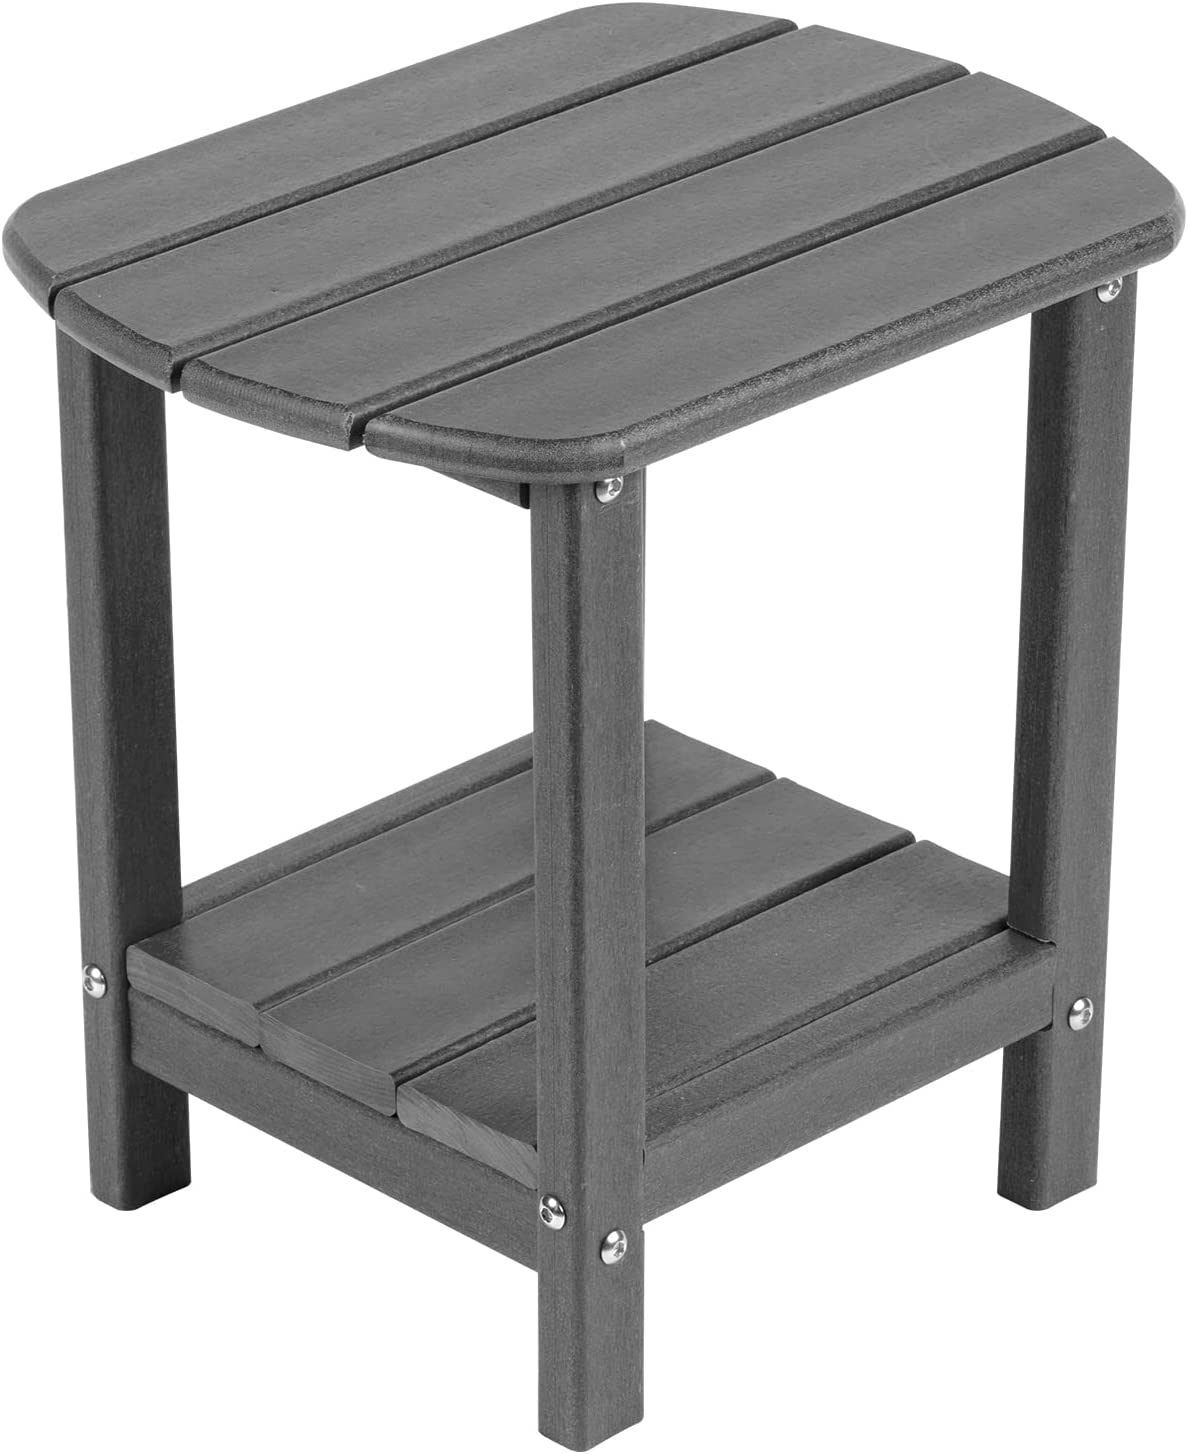 NALONE Adirondack Side Table 16.5" Outdoor Side Table HDPE Plastic Double Adirondack End Table Small Table for Patio (Grey) - image 1 of 6